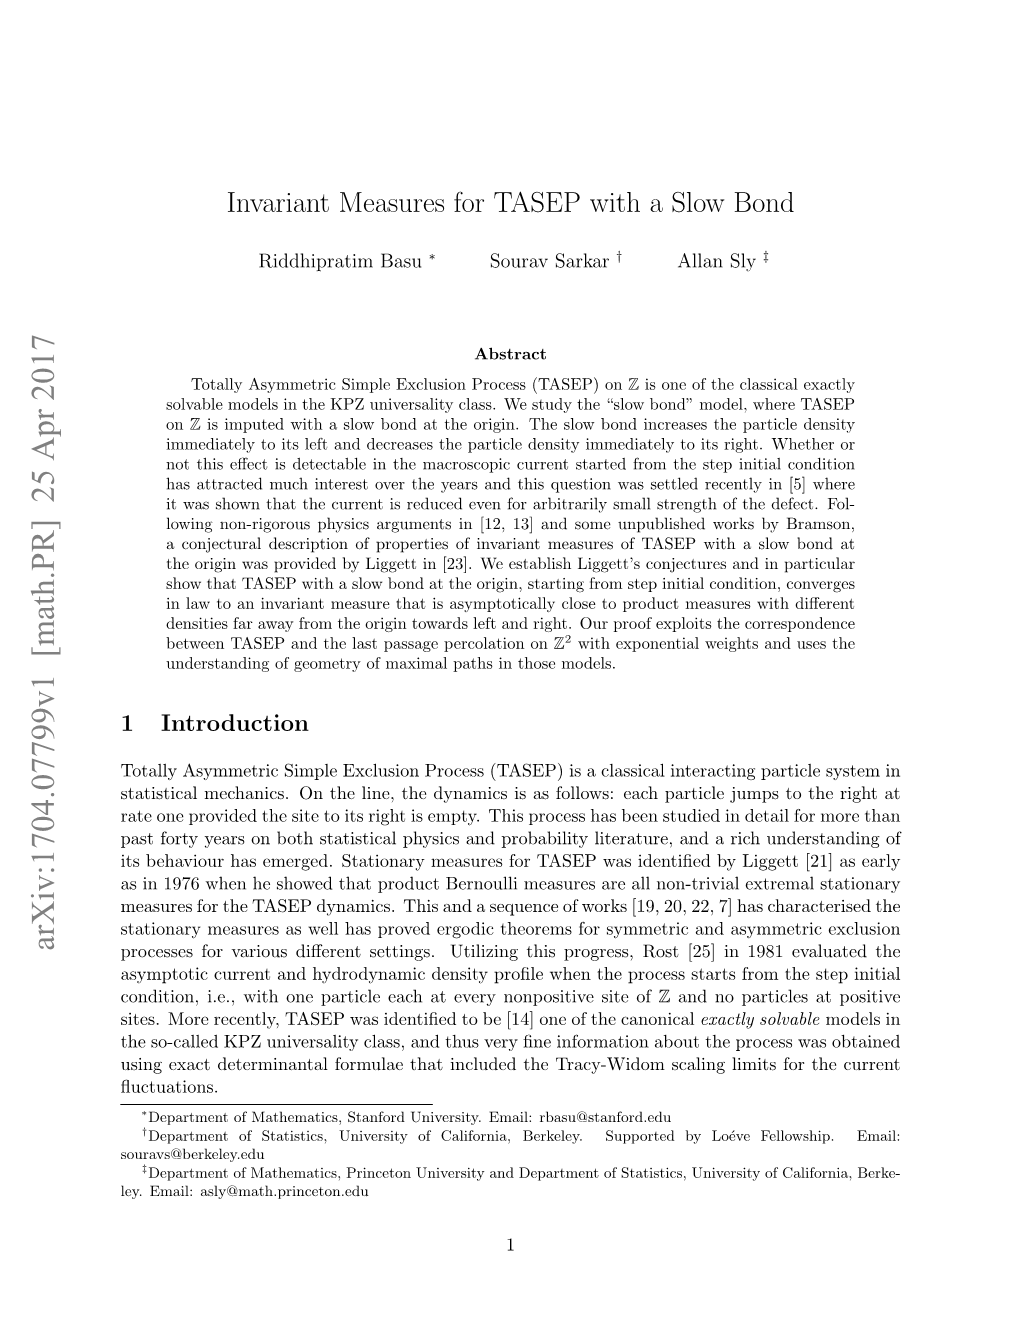 Invariant Measures for TASEP with a Slow Bond